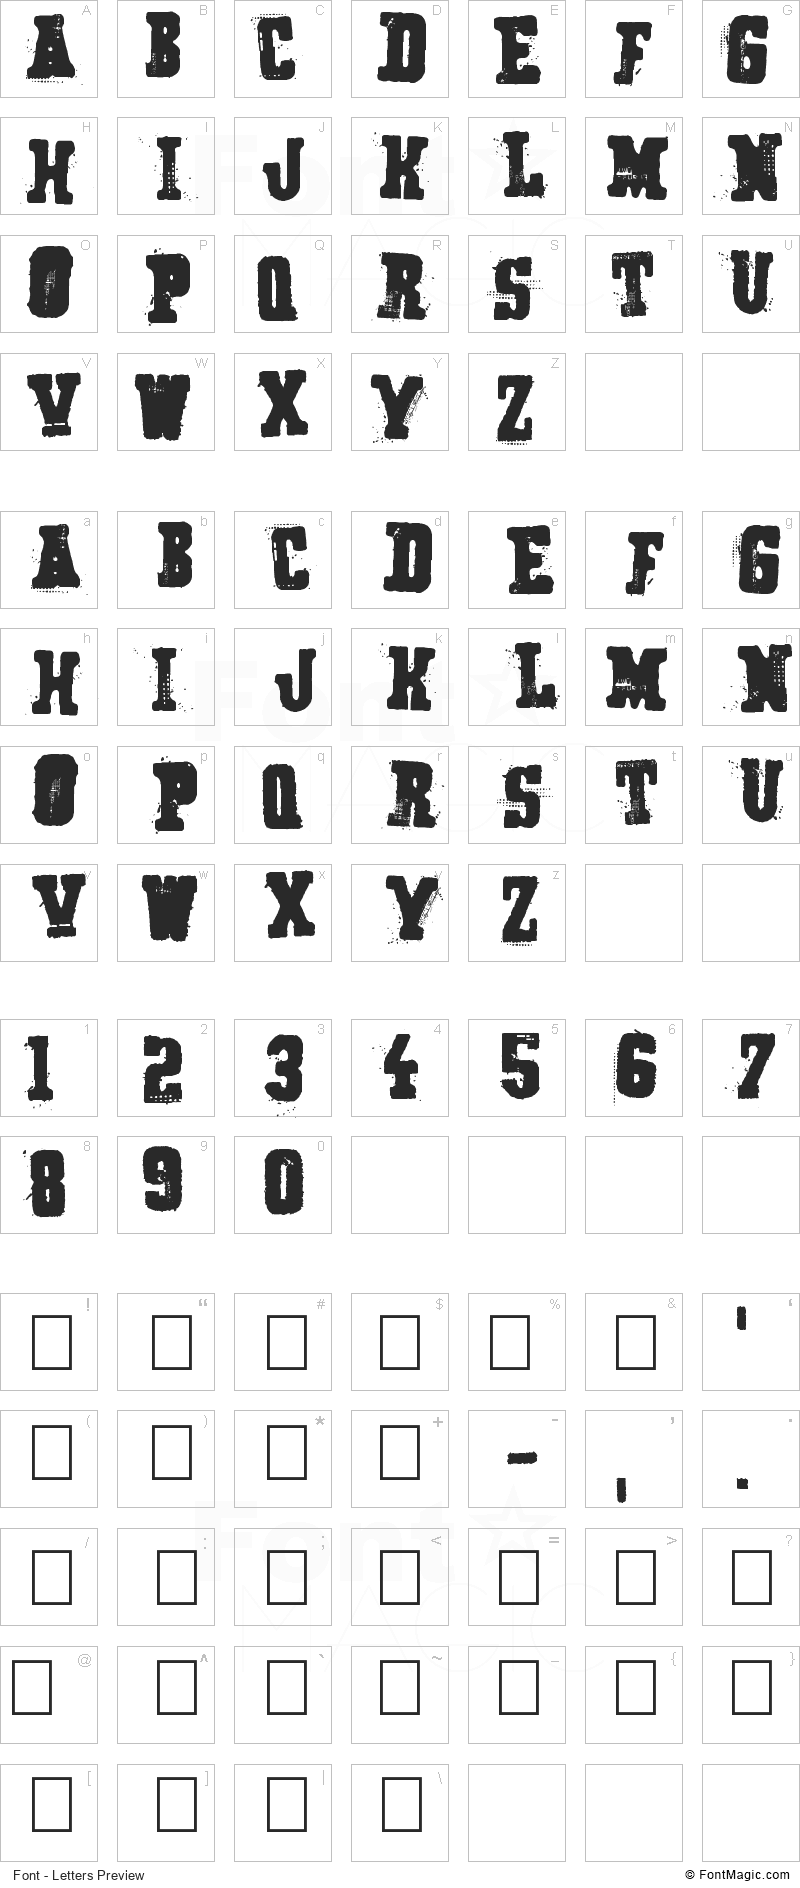 Secret Agency Font - All Latters Preview Chart